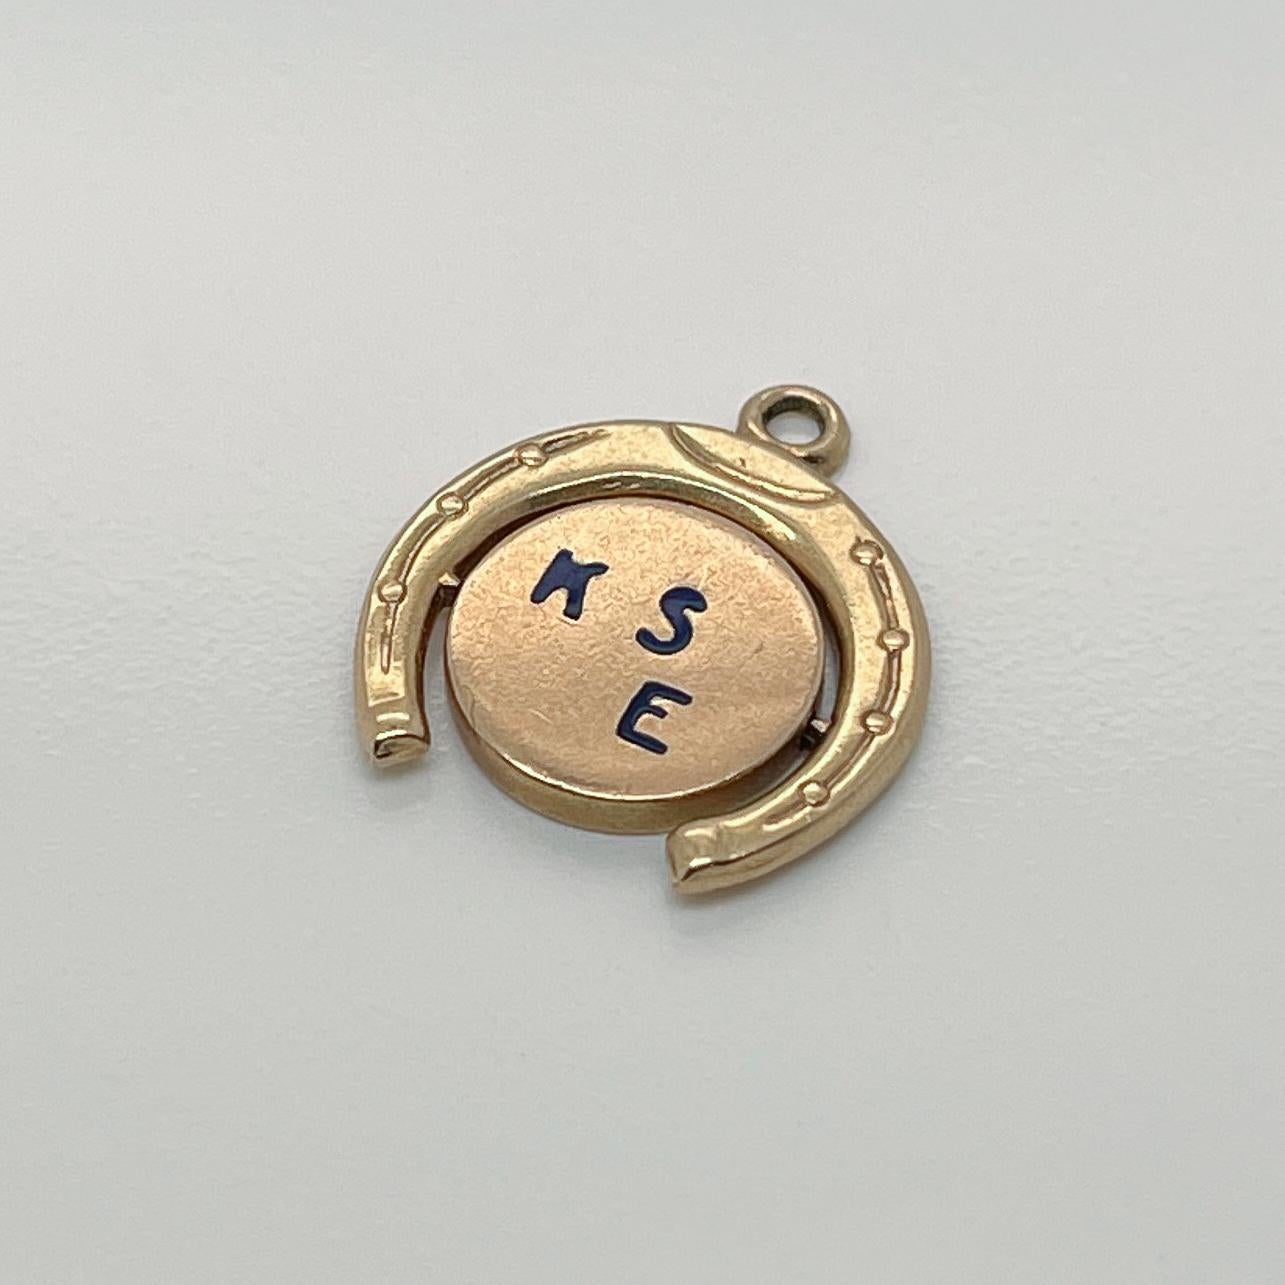 Vintage 14K Gold Charm of a Spinning 